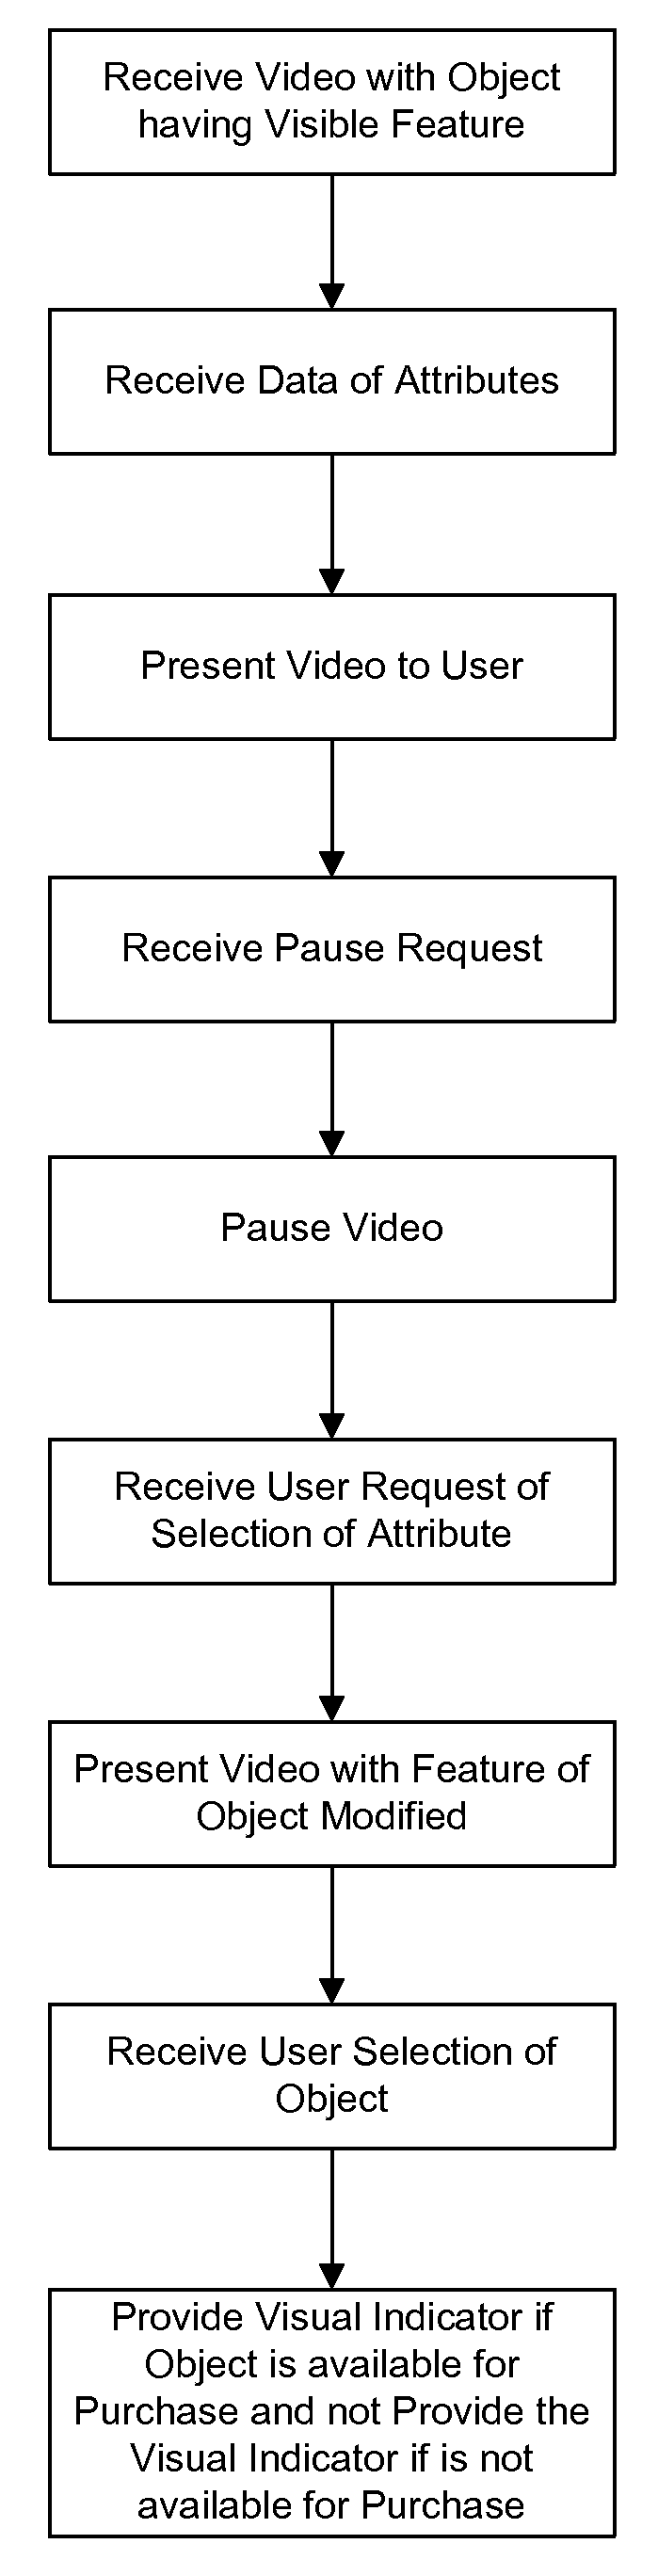 System, Method, and Computer Program Product for Video Based Services and Commerce